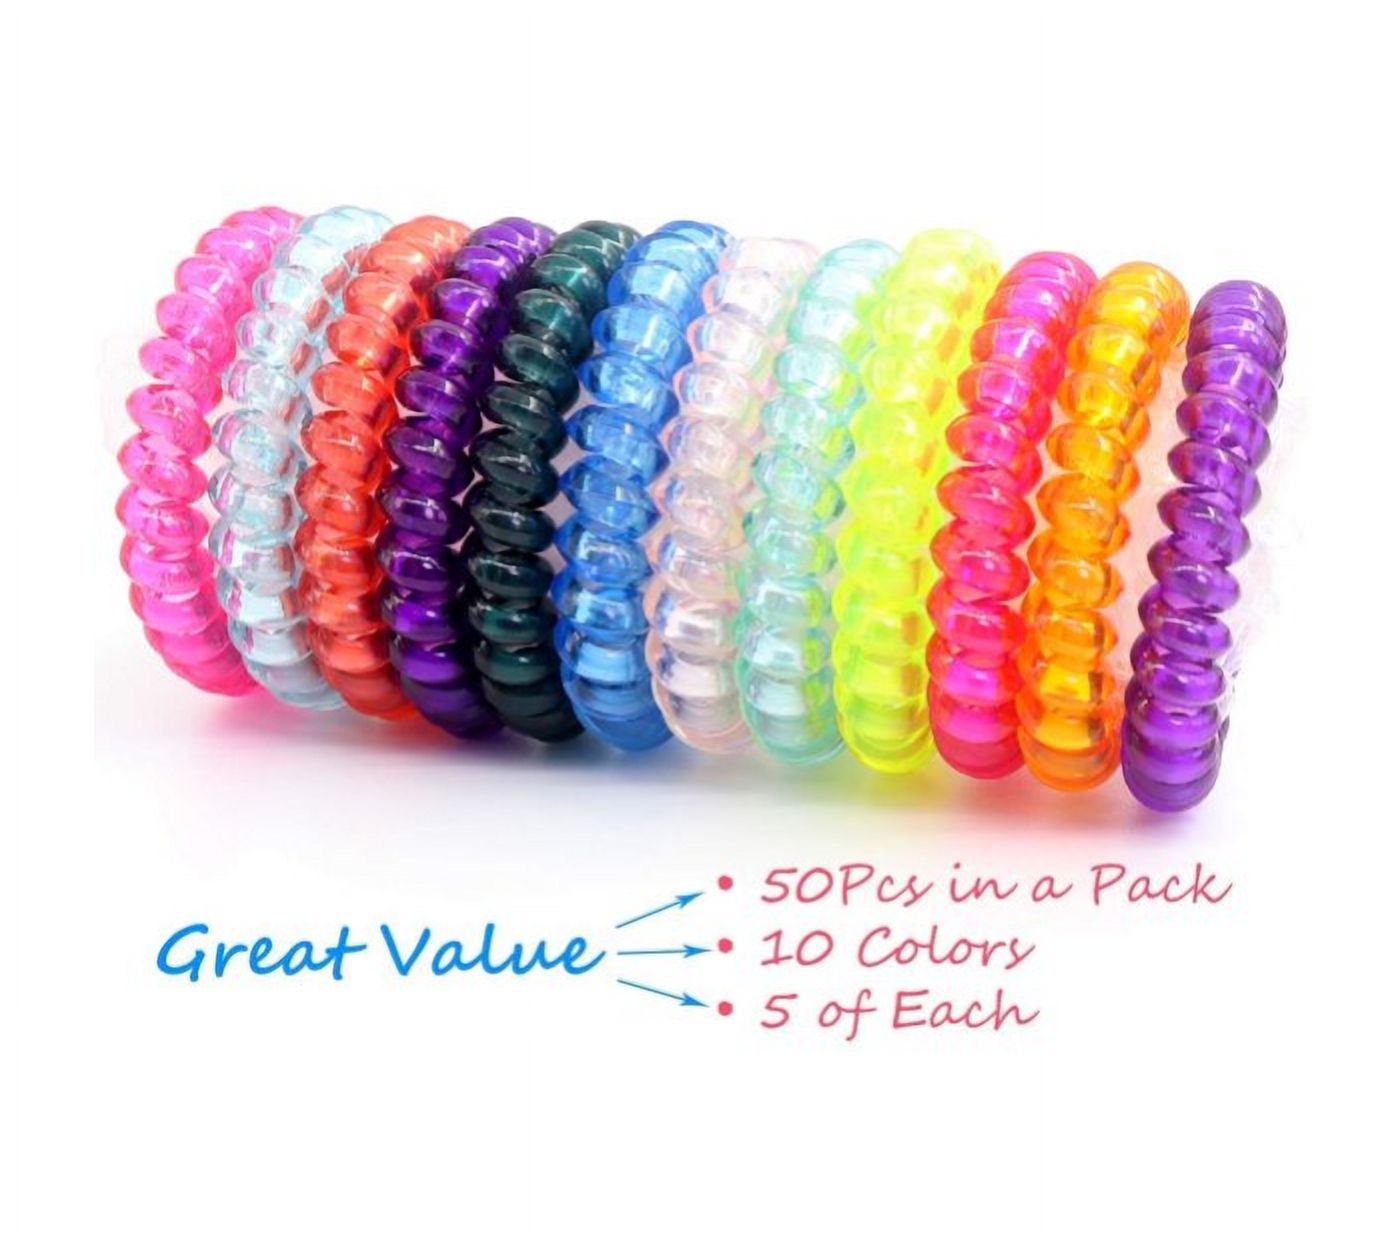 Spiral Hair Ties,50 Pcs Colorful No Crease Hair Ties,Candy Color Phone Cord Hair Ties Coils,Spiral Bracelets,Elastic Coil Hair Ties Ponytail Holders Hair Accessories for Women Girls All Hair Styles - image 3 of 10